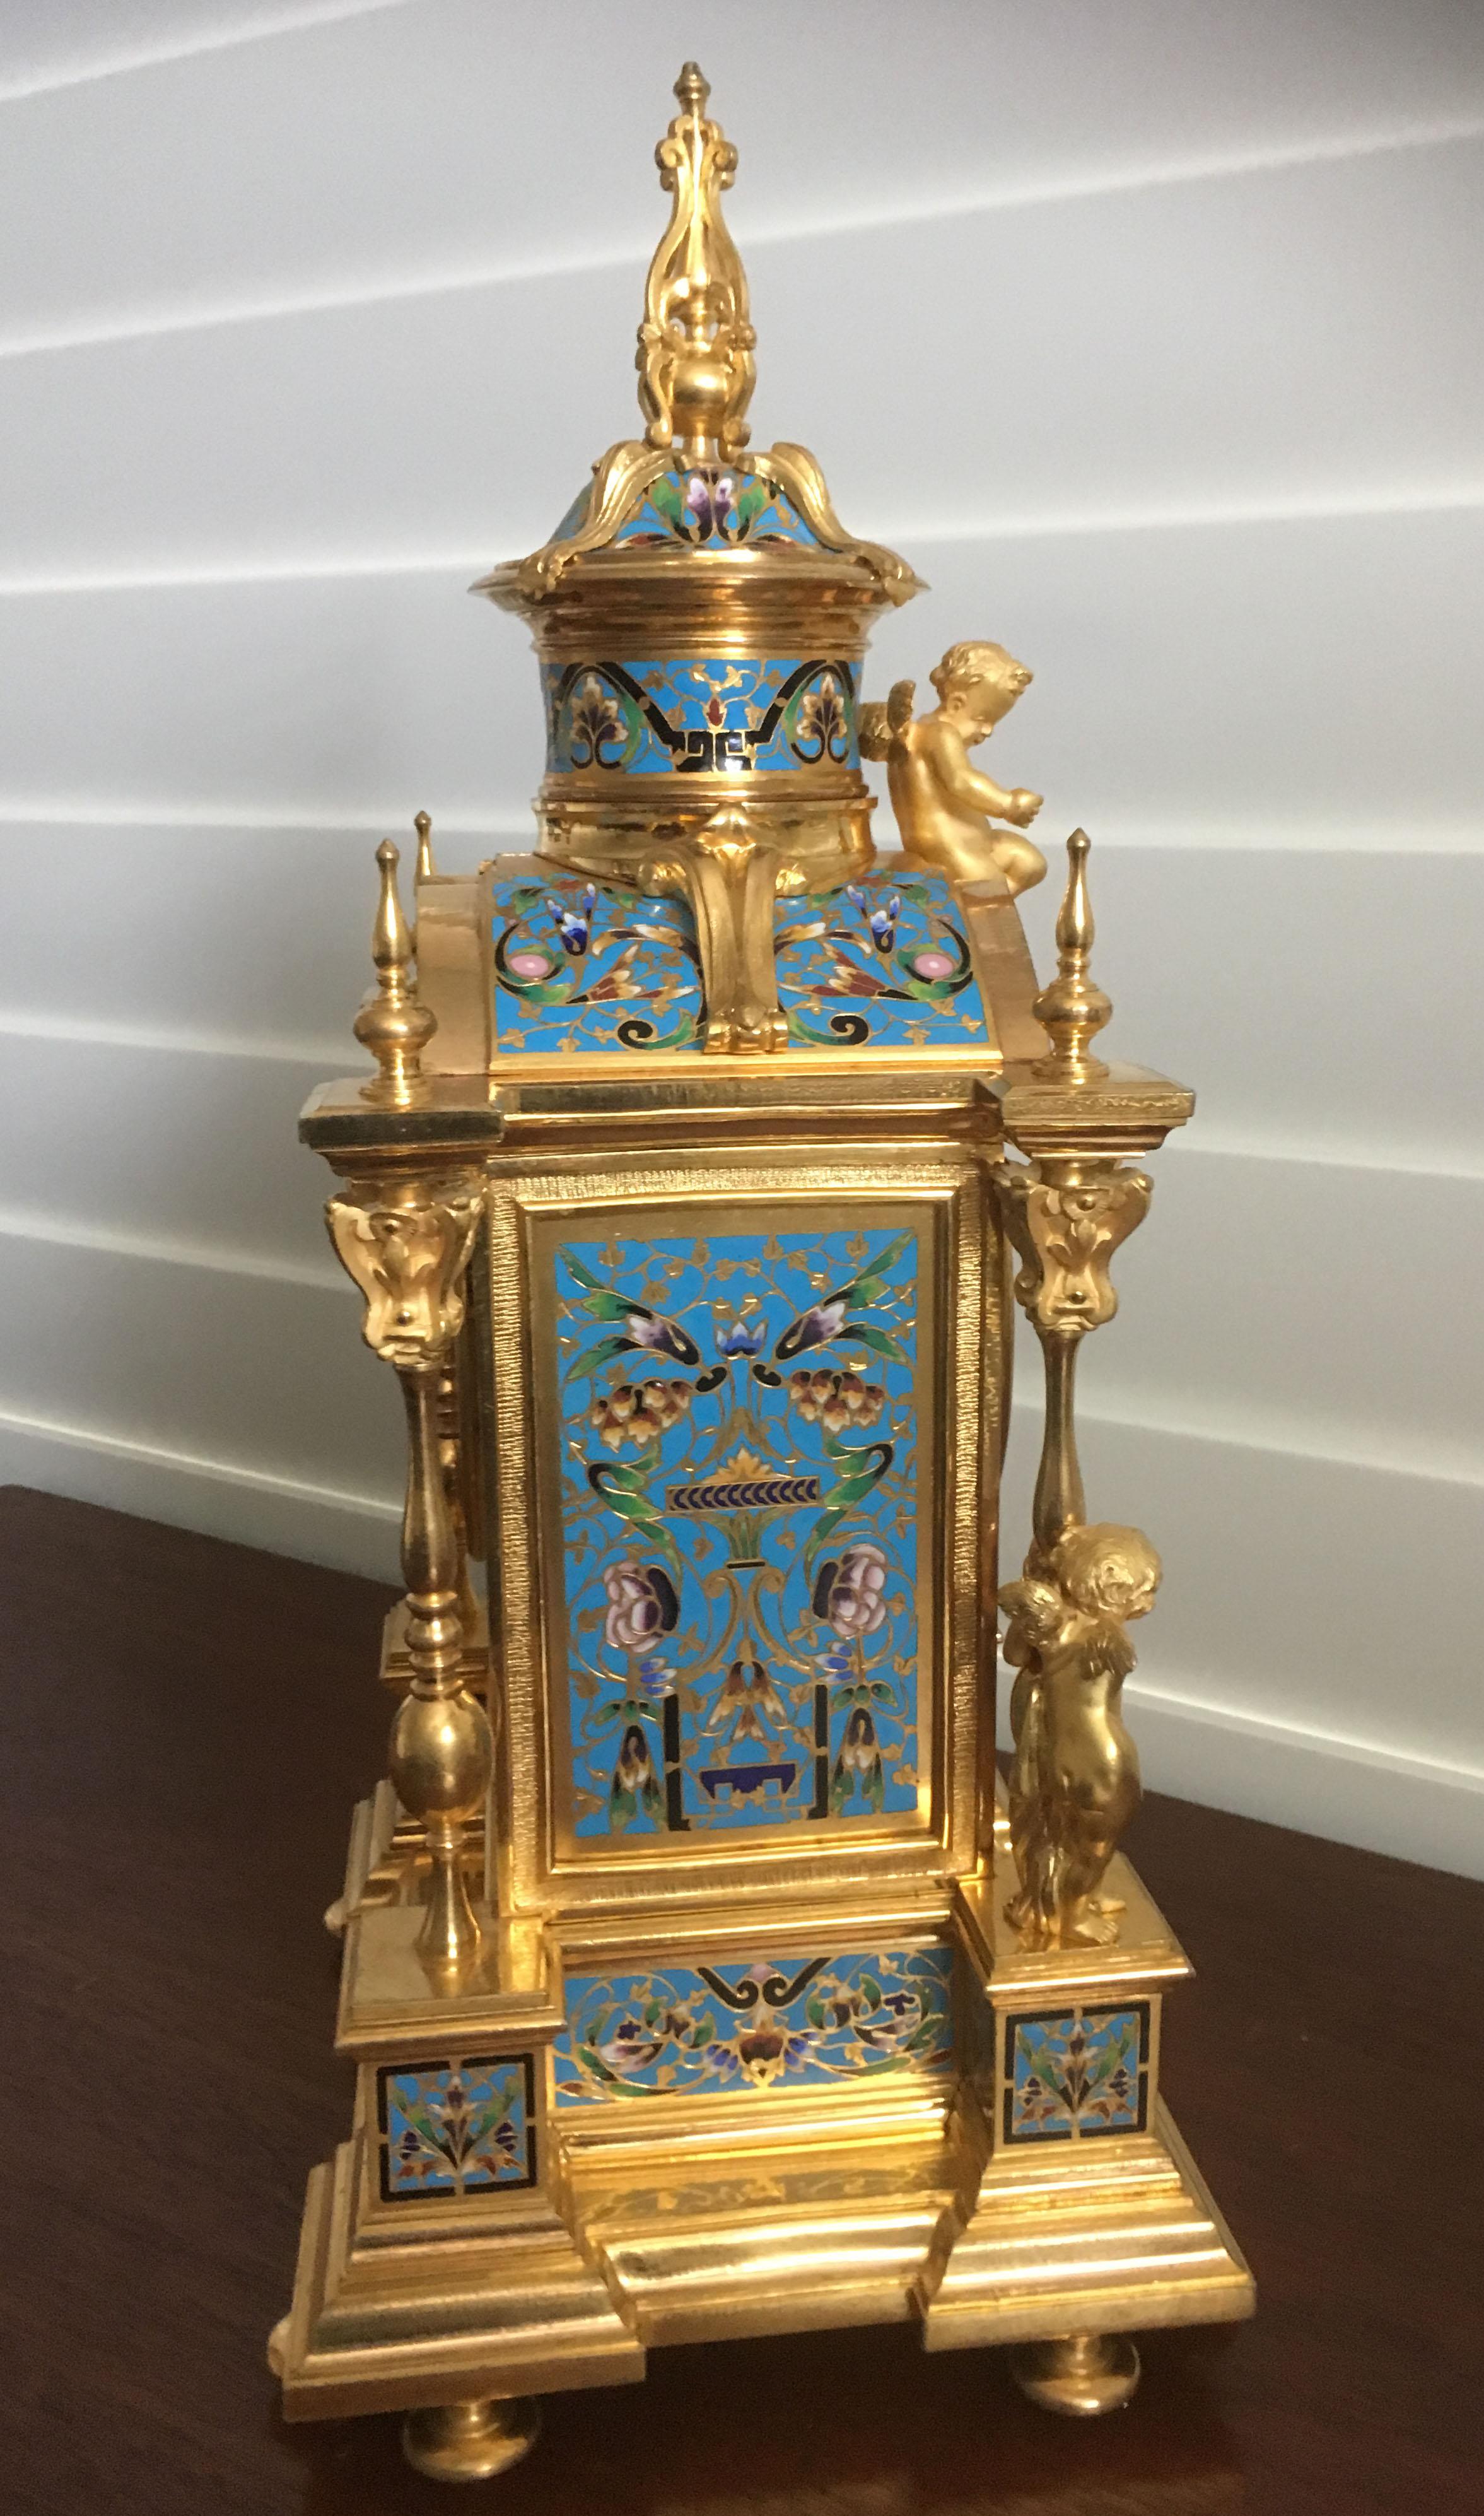 Late 19th Century French Gilt Bronze and Champlevé Enamel Clock Set, Japy Freres, circa 1870 For Sale